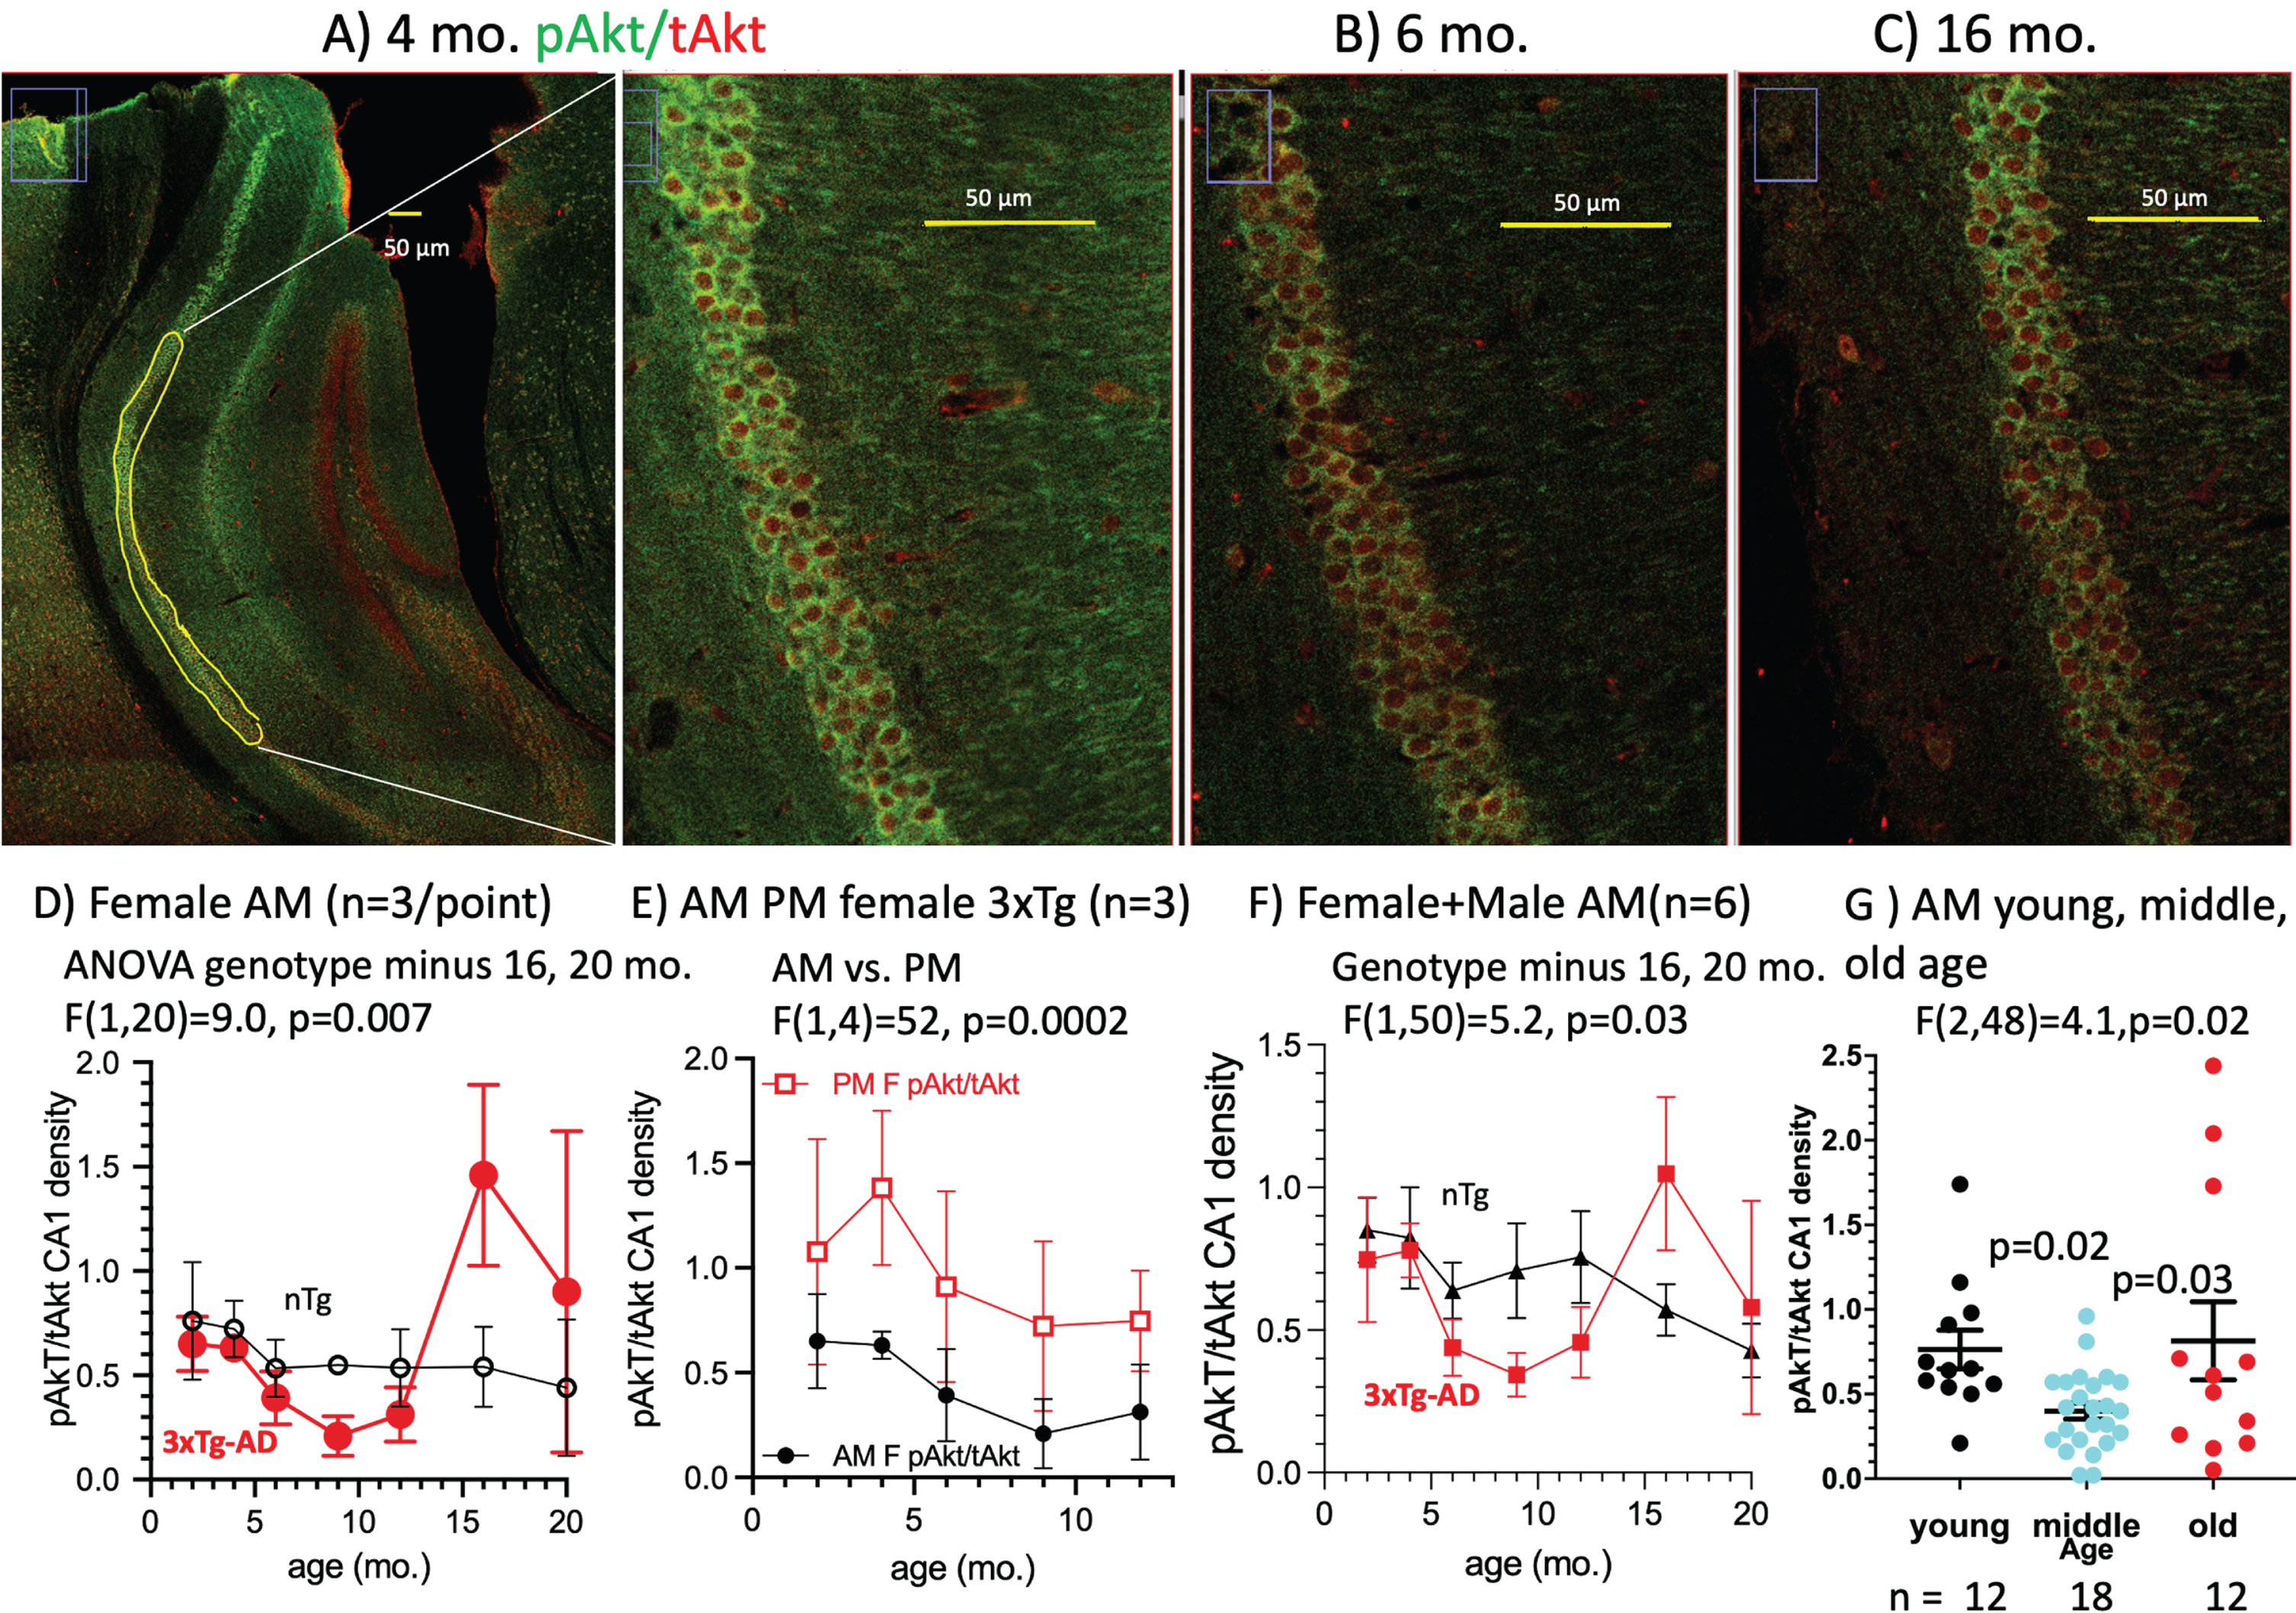 Age and genotype changes in pAkt/tAkt ratio in CA1 pyramidal neurons. A) In this 4-month-old female 3xTg-AD harvested in the AM, the pAkt/tAkt ratio was brighter than B) in a 6-month-old female AM brain (pAkt (green), tAkt (red)) due to a decrease in pAkt. C) A 16-month-old female AM brain with a higher ratio of pAkt/tAkt due to lower tAkt. Across the age-span, the pAkt/tAkt ratio in D) female AM mice dipped lower in middle-age, then higher in old age. E) Ratios in the female AM were lower than in the PM. F) 3xTg-AD ratios for males and females combined dipped lower than similar nTg brains. G) Age effects for AM females plus males combined and grouped by young (2 and 4 months), lower middle-age (6, 9, and 12 months) ratios and elevated ratios in old brains (16 and 20 months).